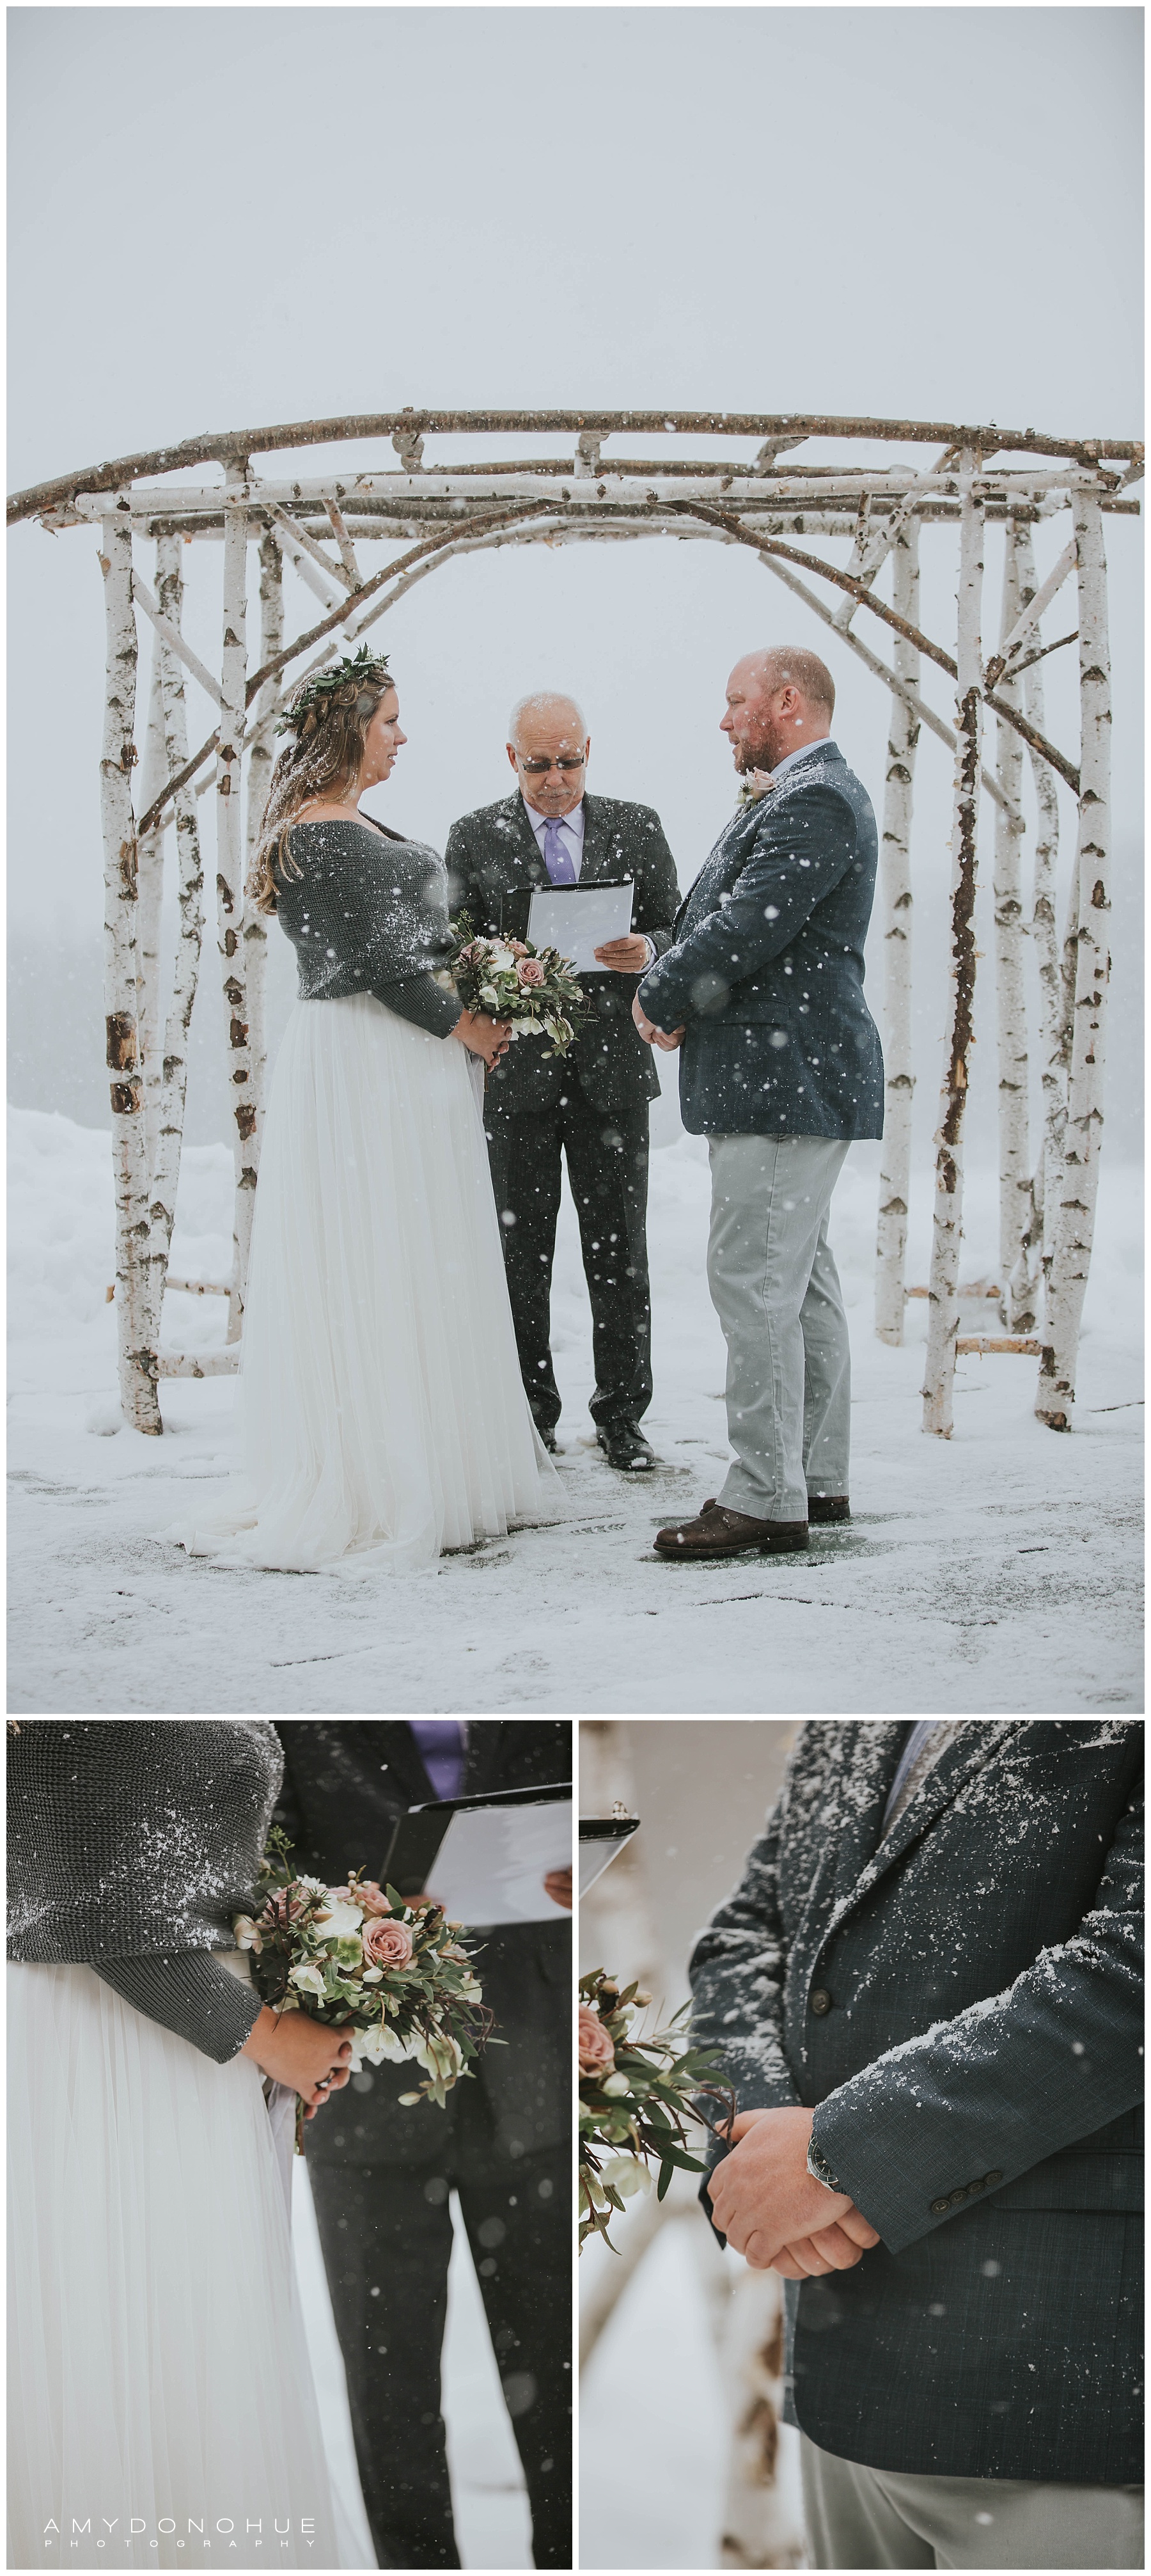 Intimate Winter Elopement | Vermont Wedding Photographer | © Amy Donohue Photography